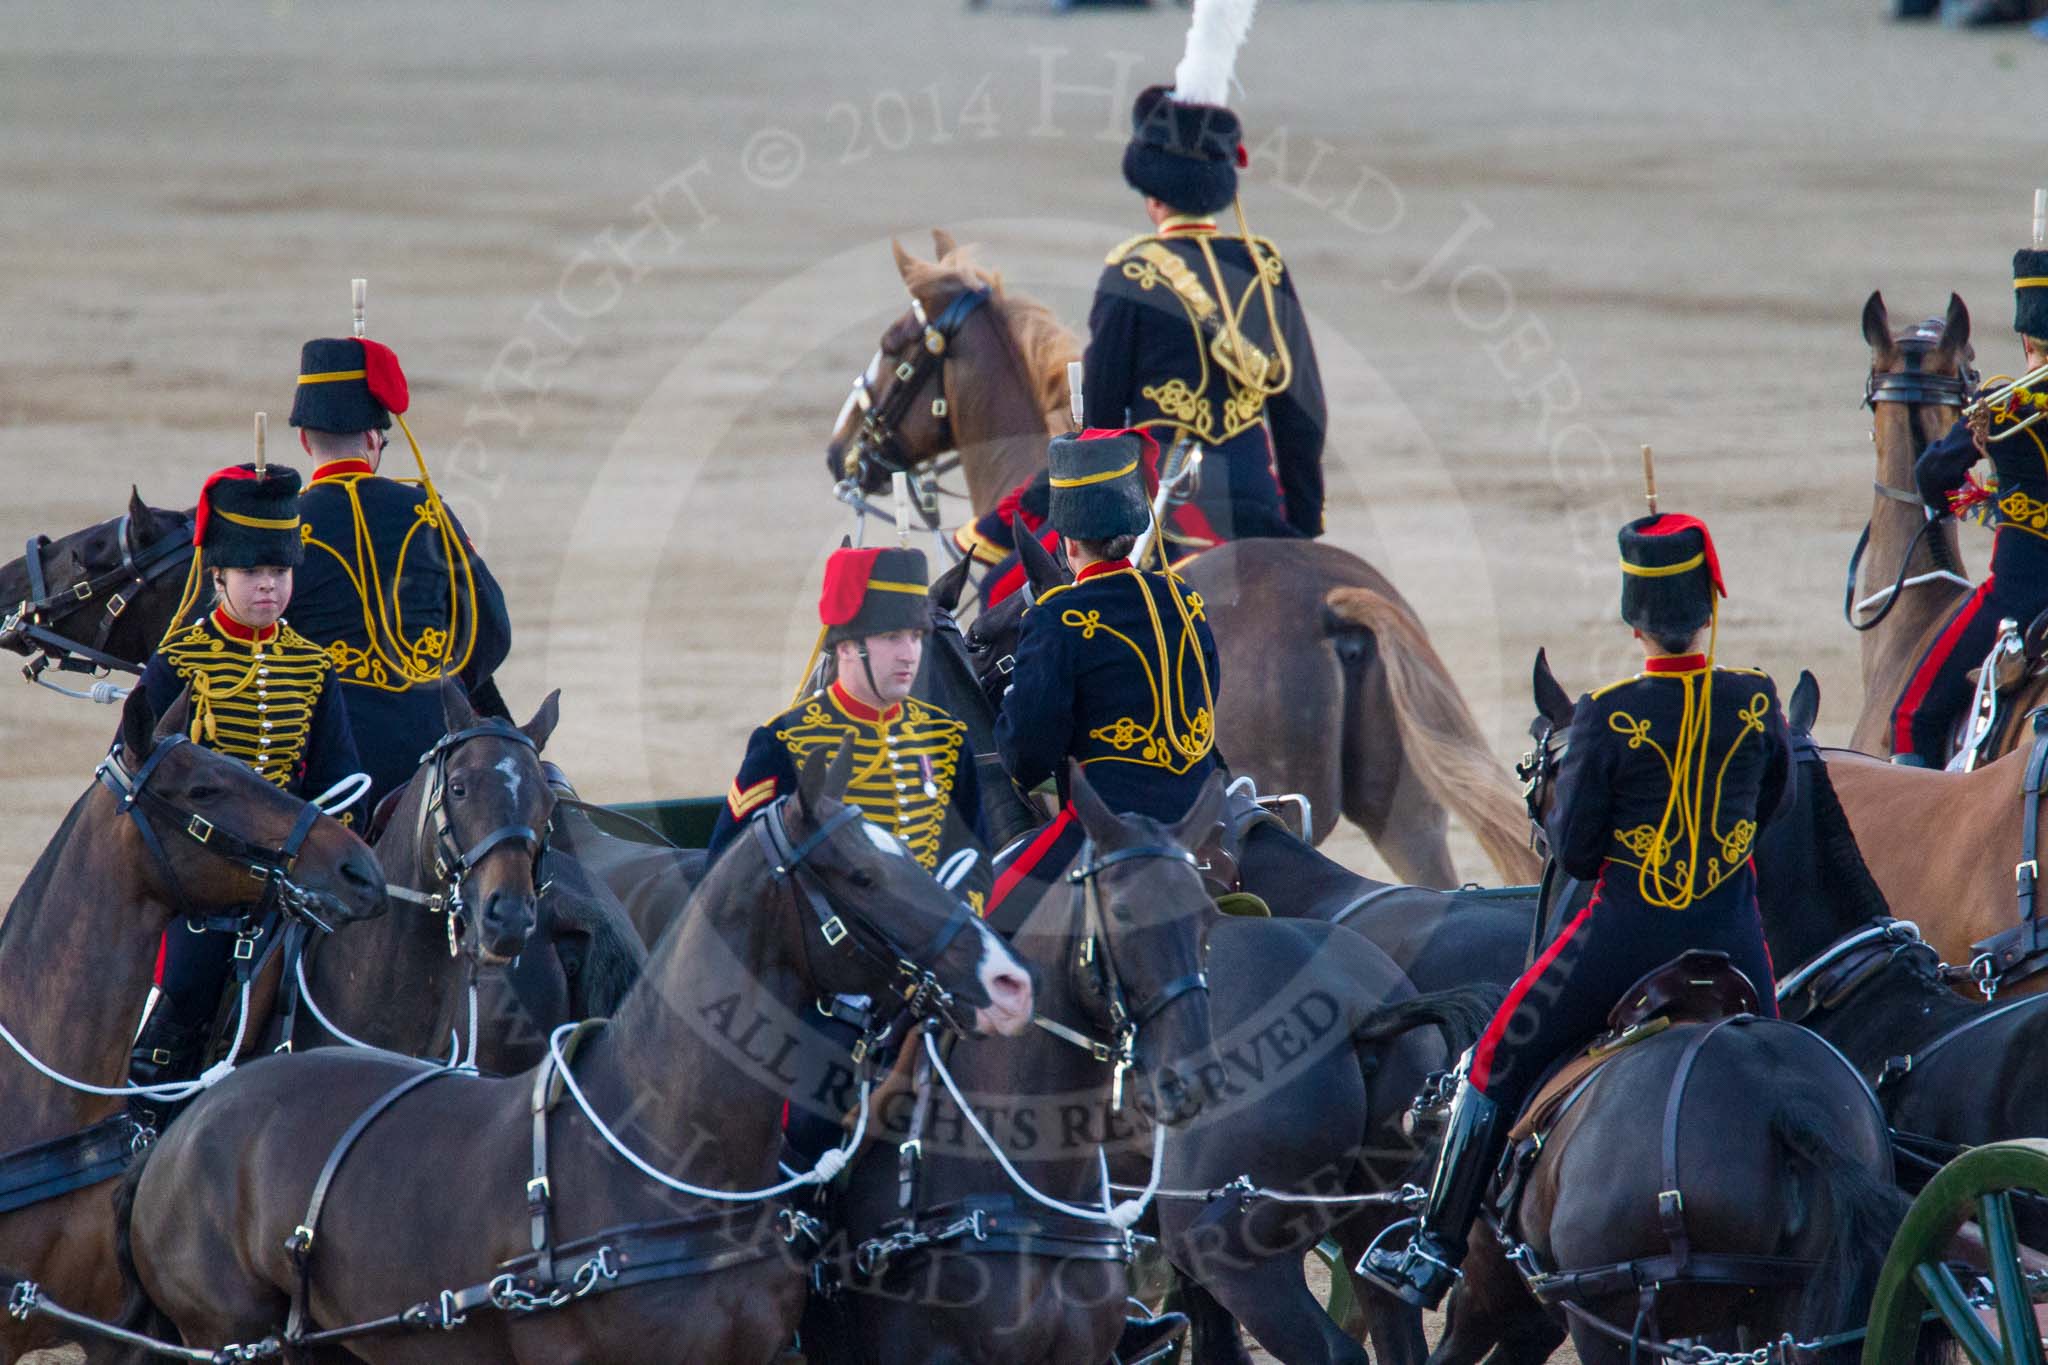 Beating Retreat 2014.
Horse Guards Parade, Westminster,
London SW1A,

United Kingdom,
on 11 June 2014 at 20:50, image #211